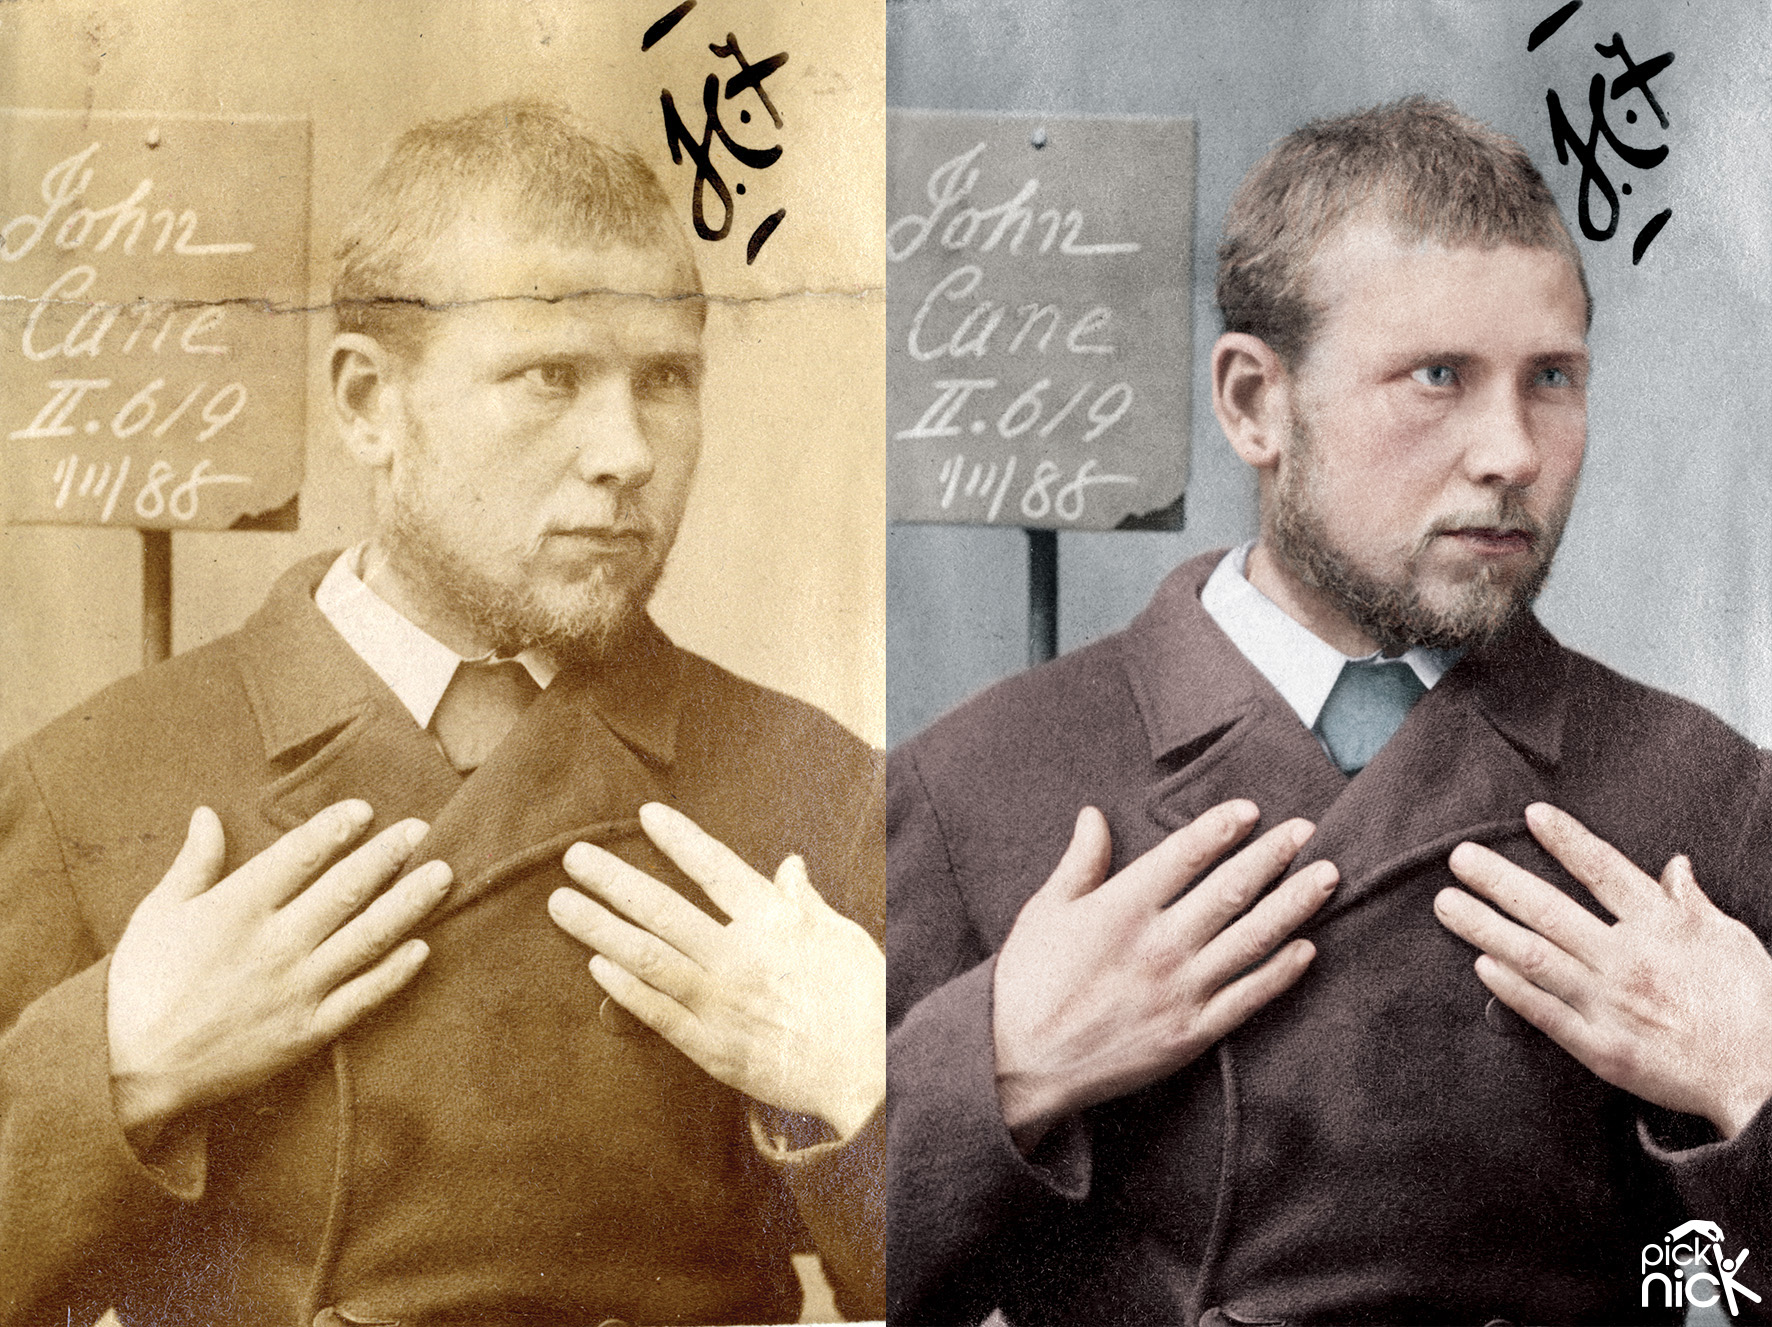 John Cane - Colourised prisoner photos showing before and after